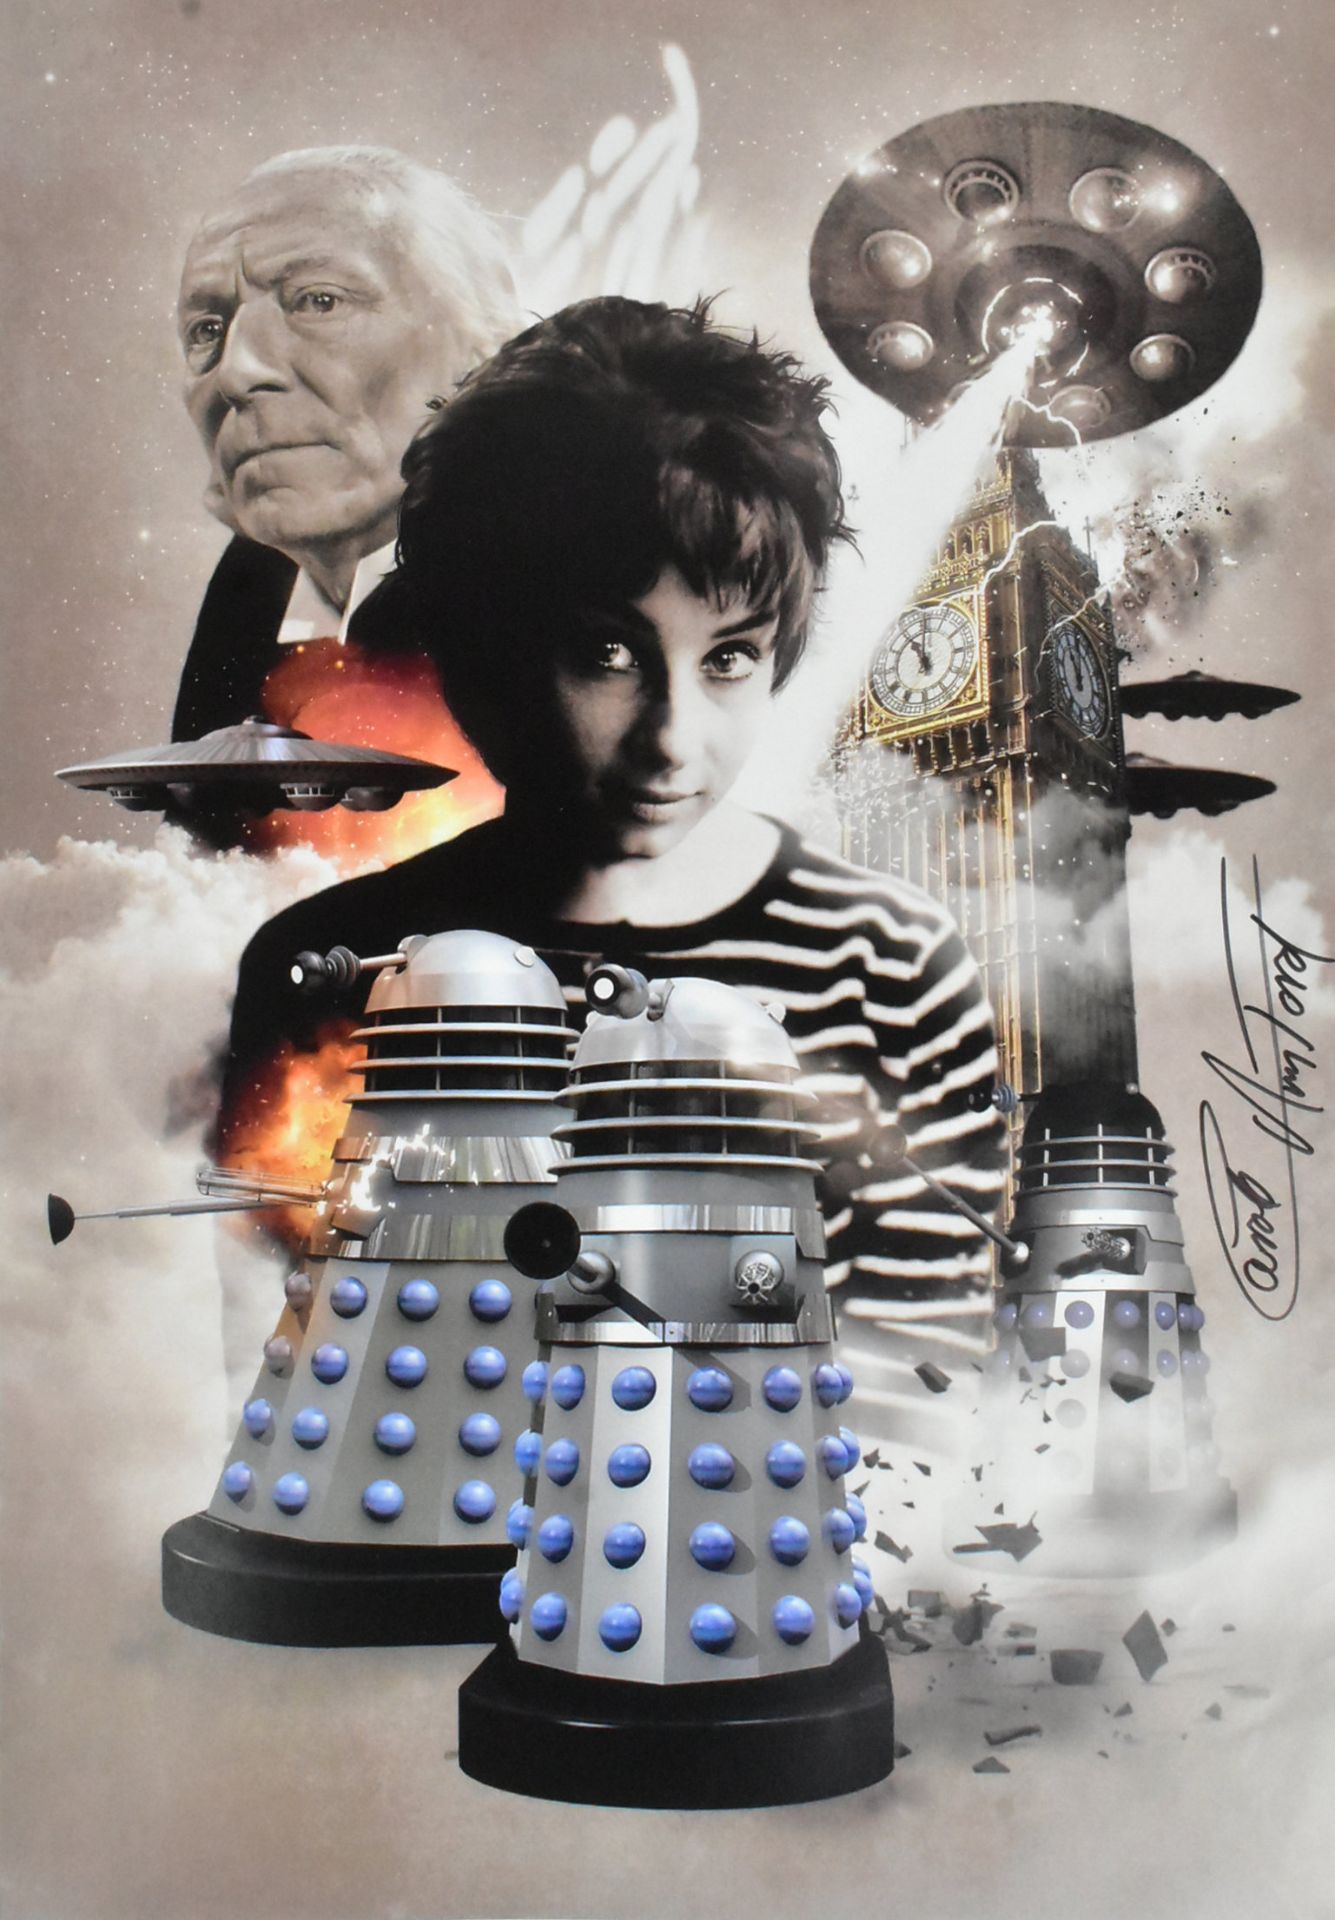 DOCTOR WHO - CAROLE ANN FORD (SUSAN) - AUTOGRAPHED POSTER